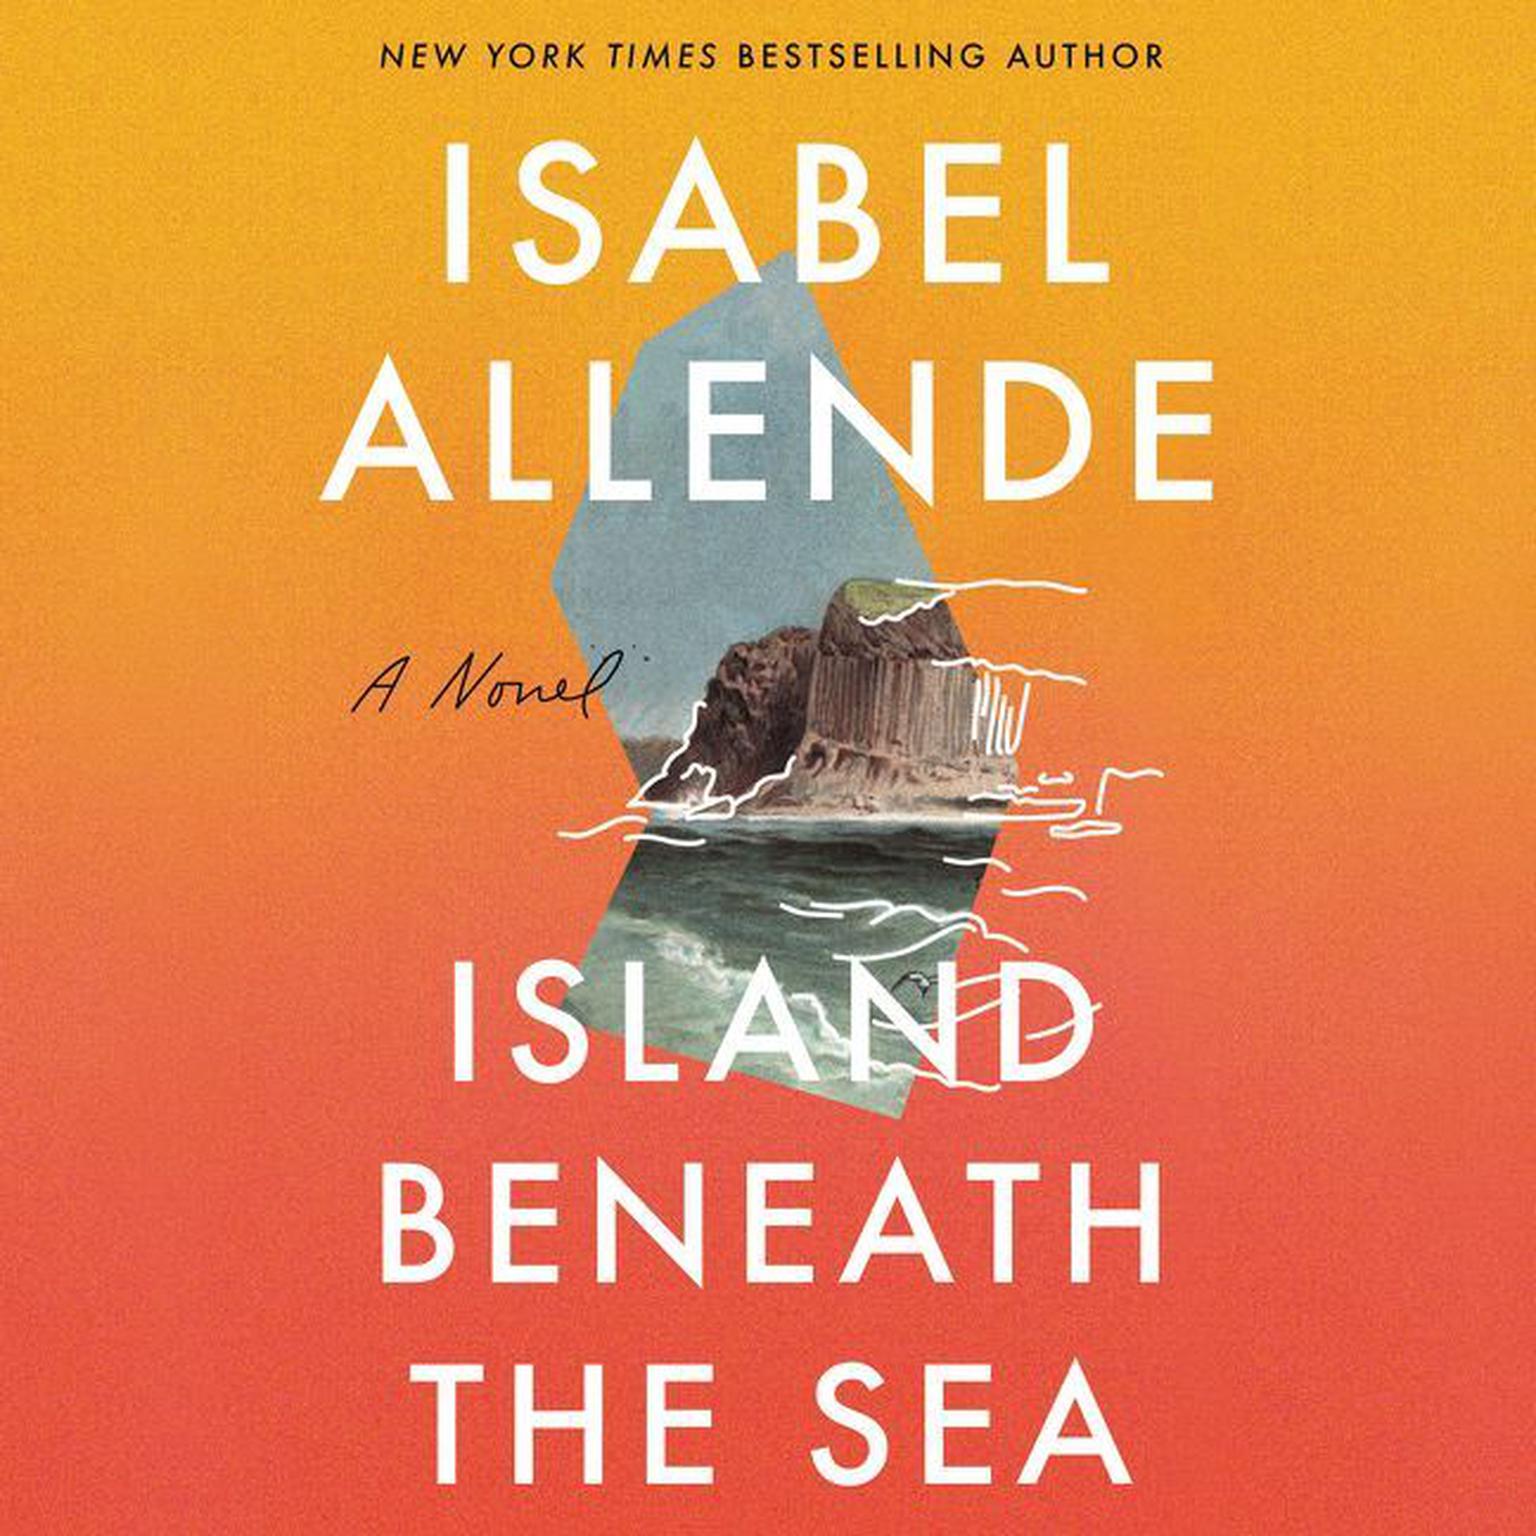 Island Beneath the Sea: A Novel Audiobook, by Isabel Allende